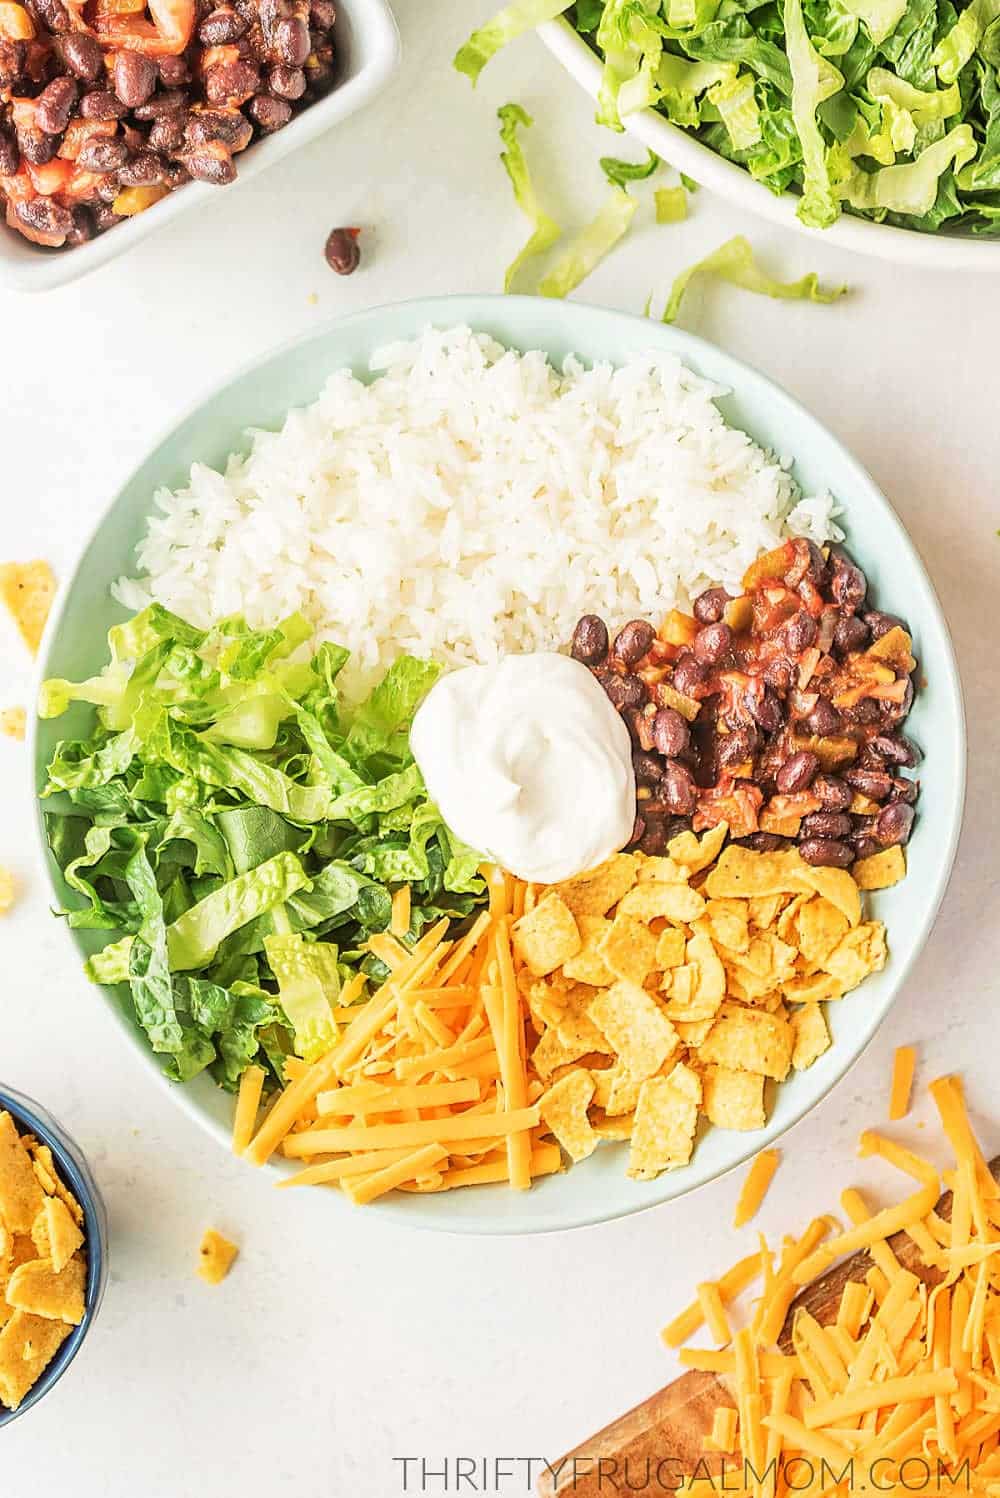 meatless mexican rice bowl ingredients in a white bowl